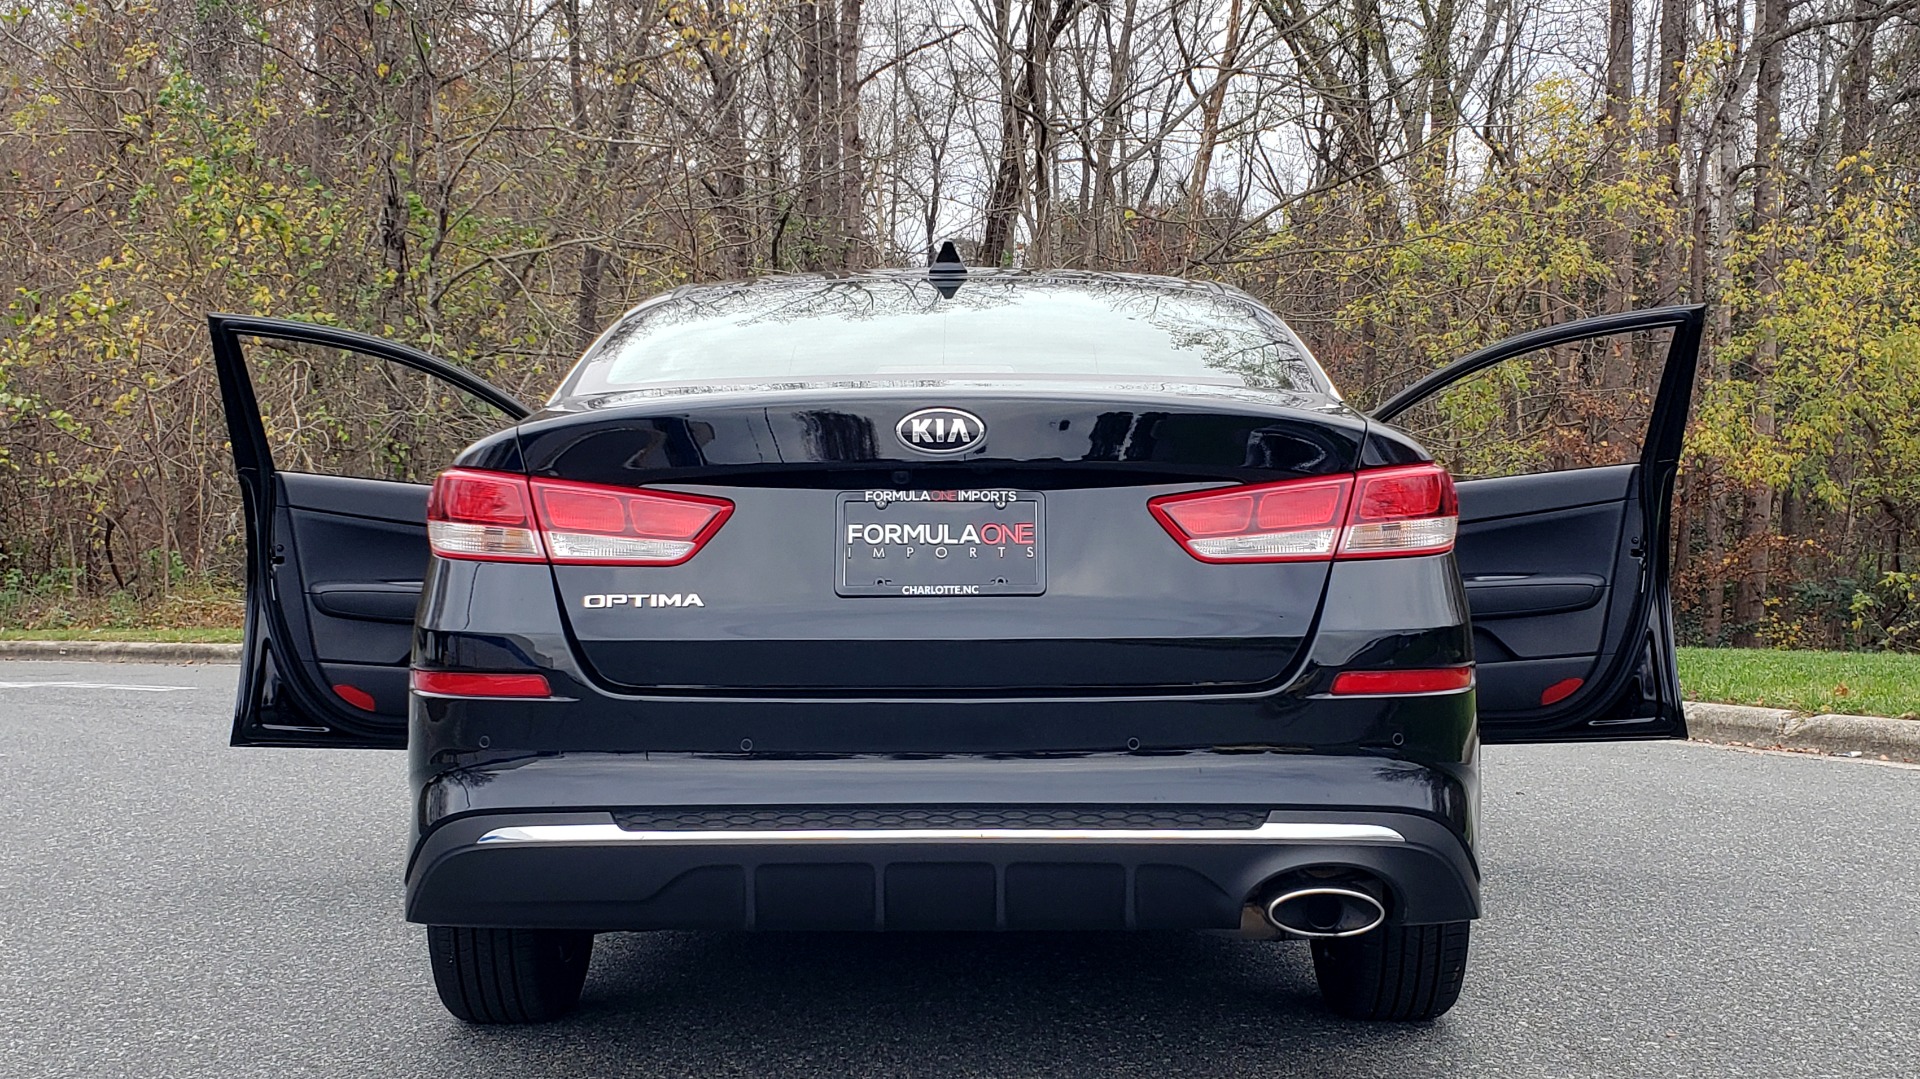 Used 2019 Kia OPTIMA LX AUTO / 2.4L 4-CYL / 6-SPD AUTO / REARVIEW / LOW MILES for sale Sold at Formula Imports in Charlotte NC 28227 24